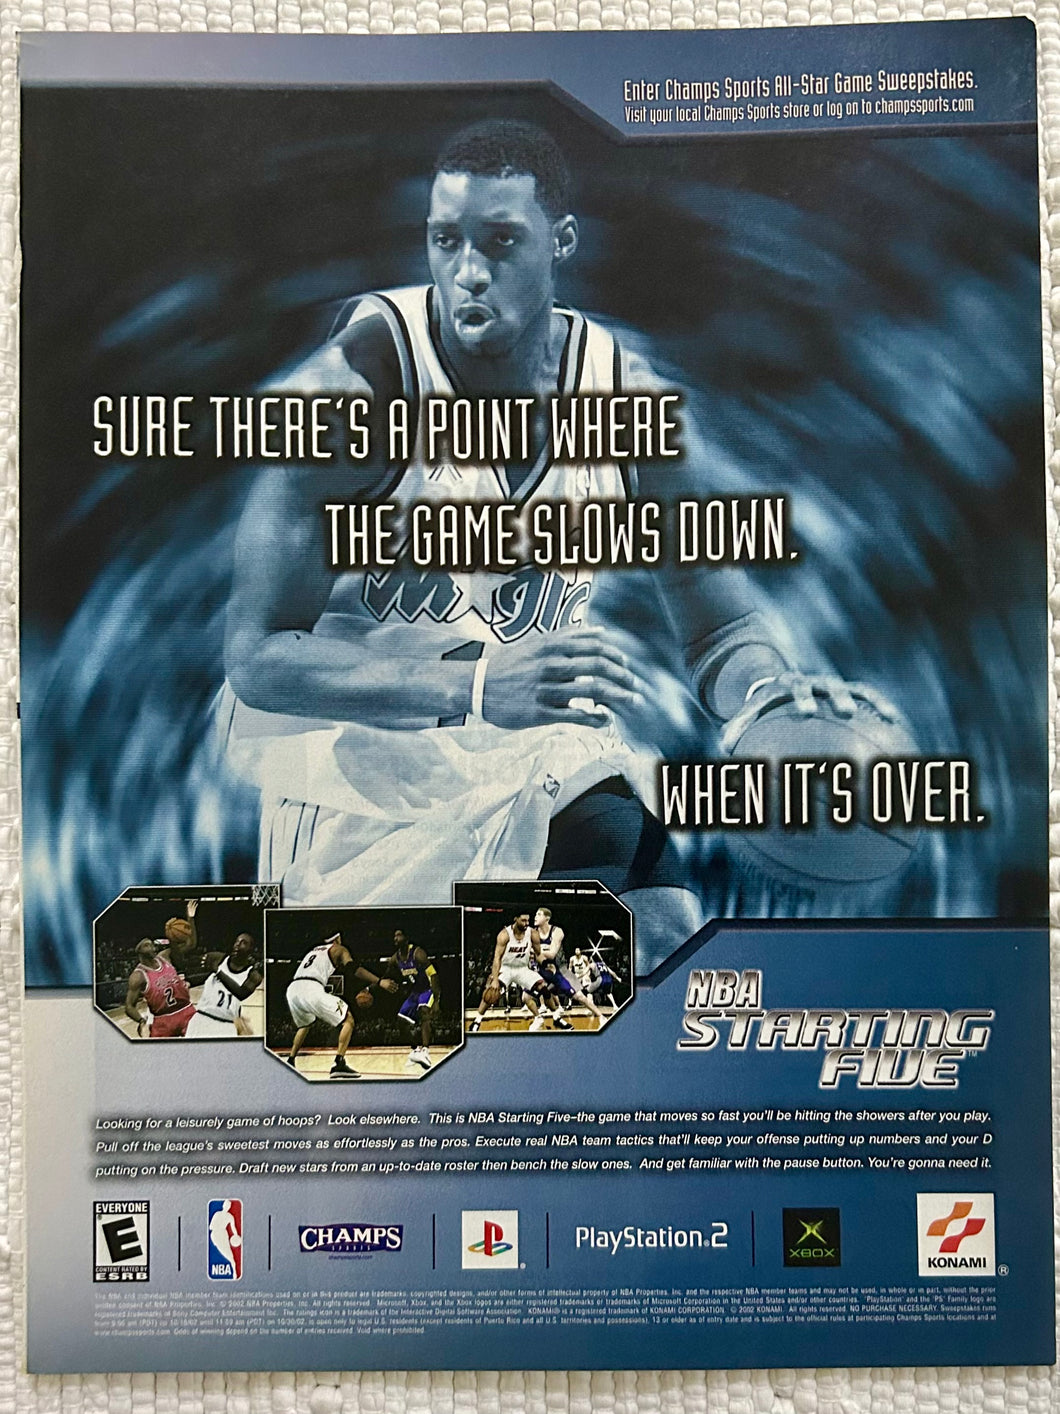 NBA Starting Five - PS2 Xbox - Original Vintage Advertisement - Print Ads - Laminated A4 Poster